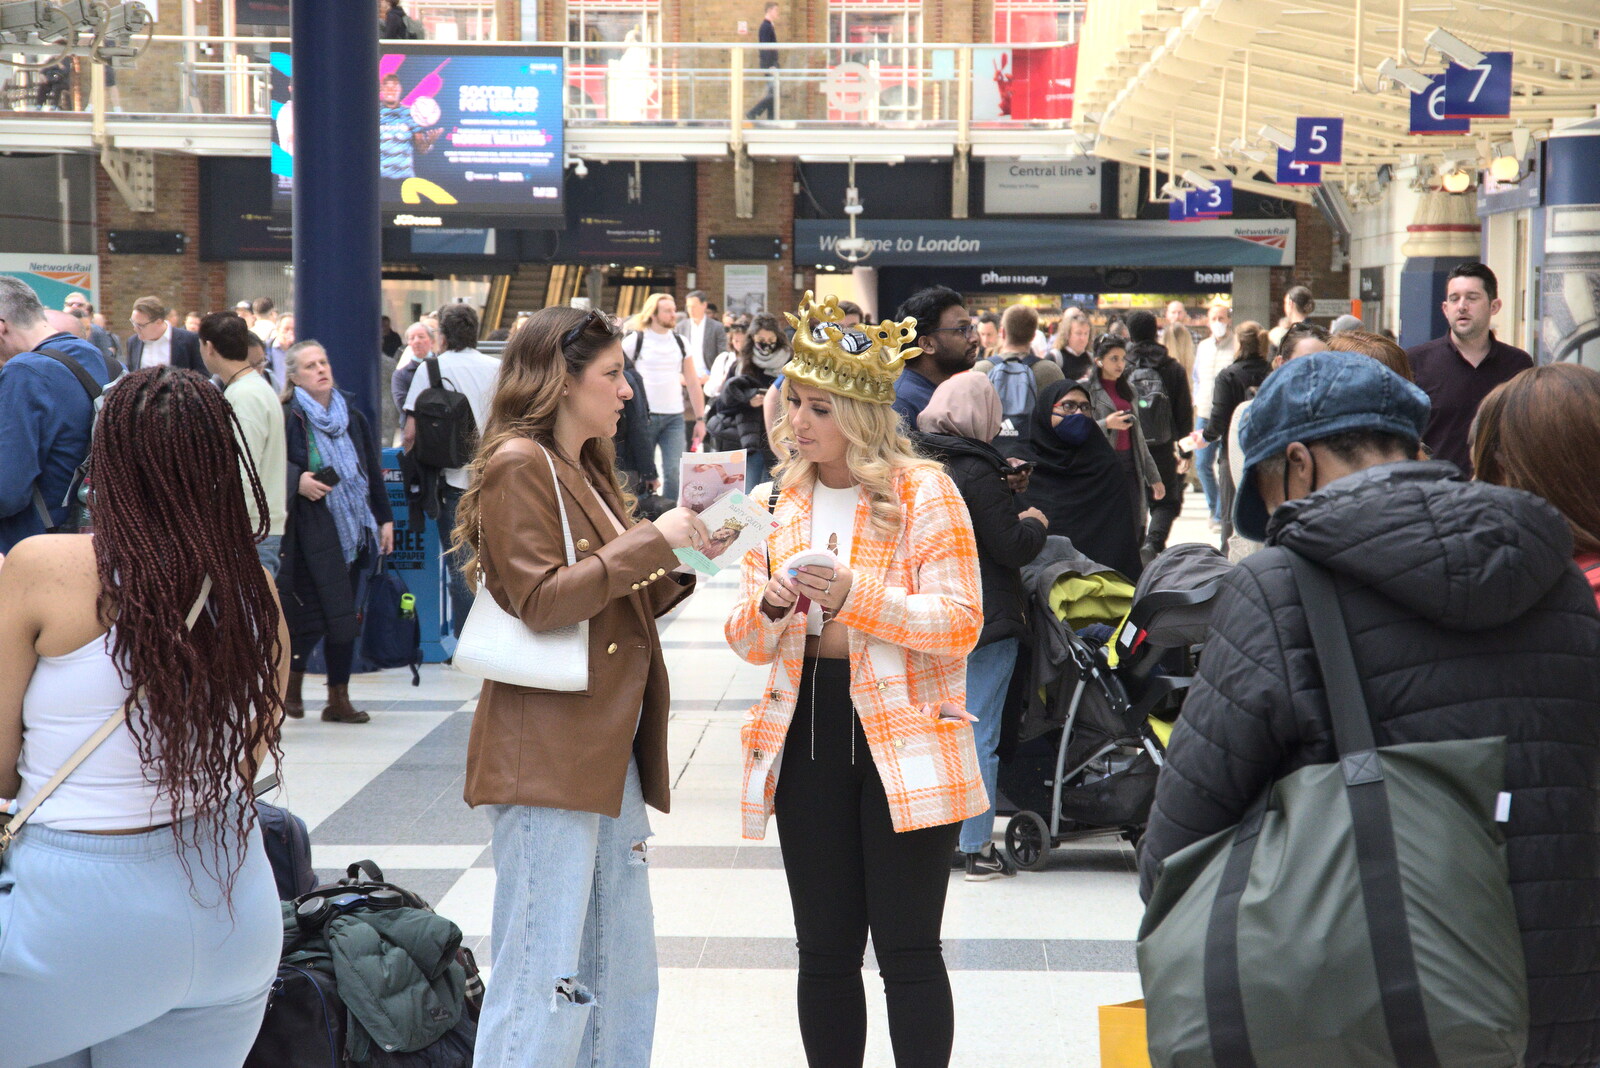 A Walk Around the South Bank, London - 25th March 2022: A woman with a crown checks a timetable